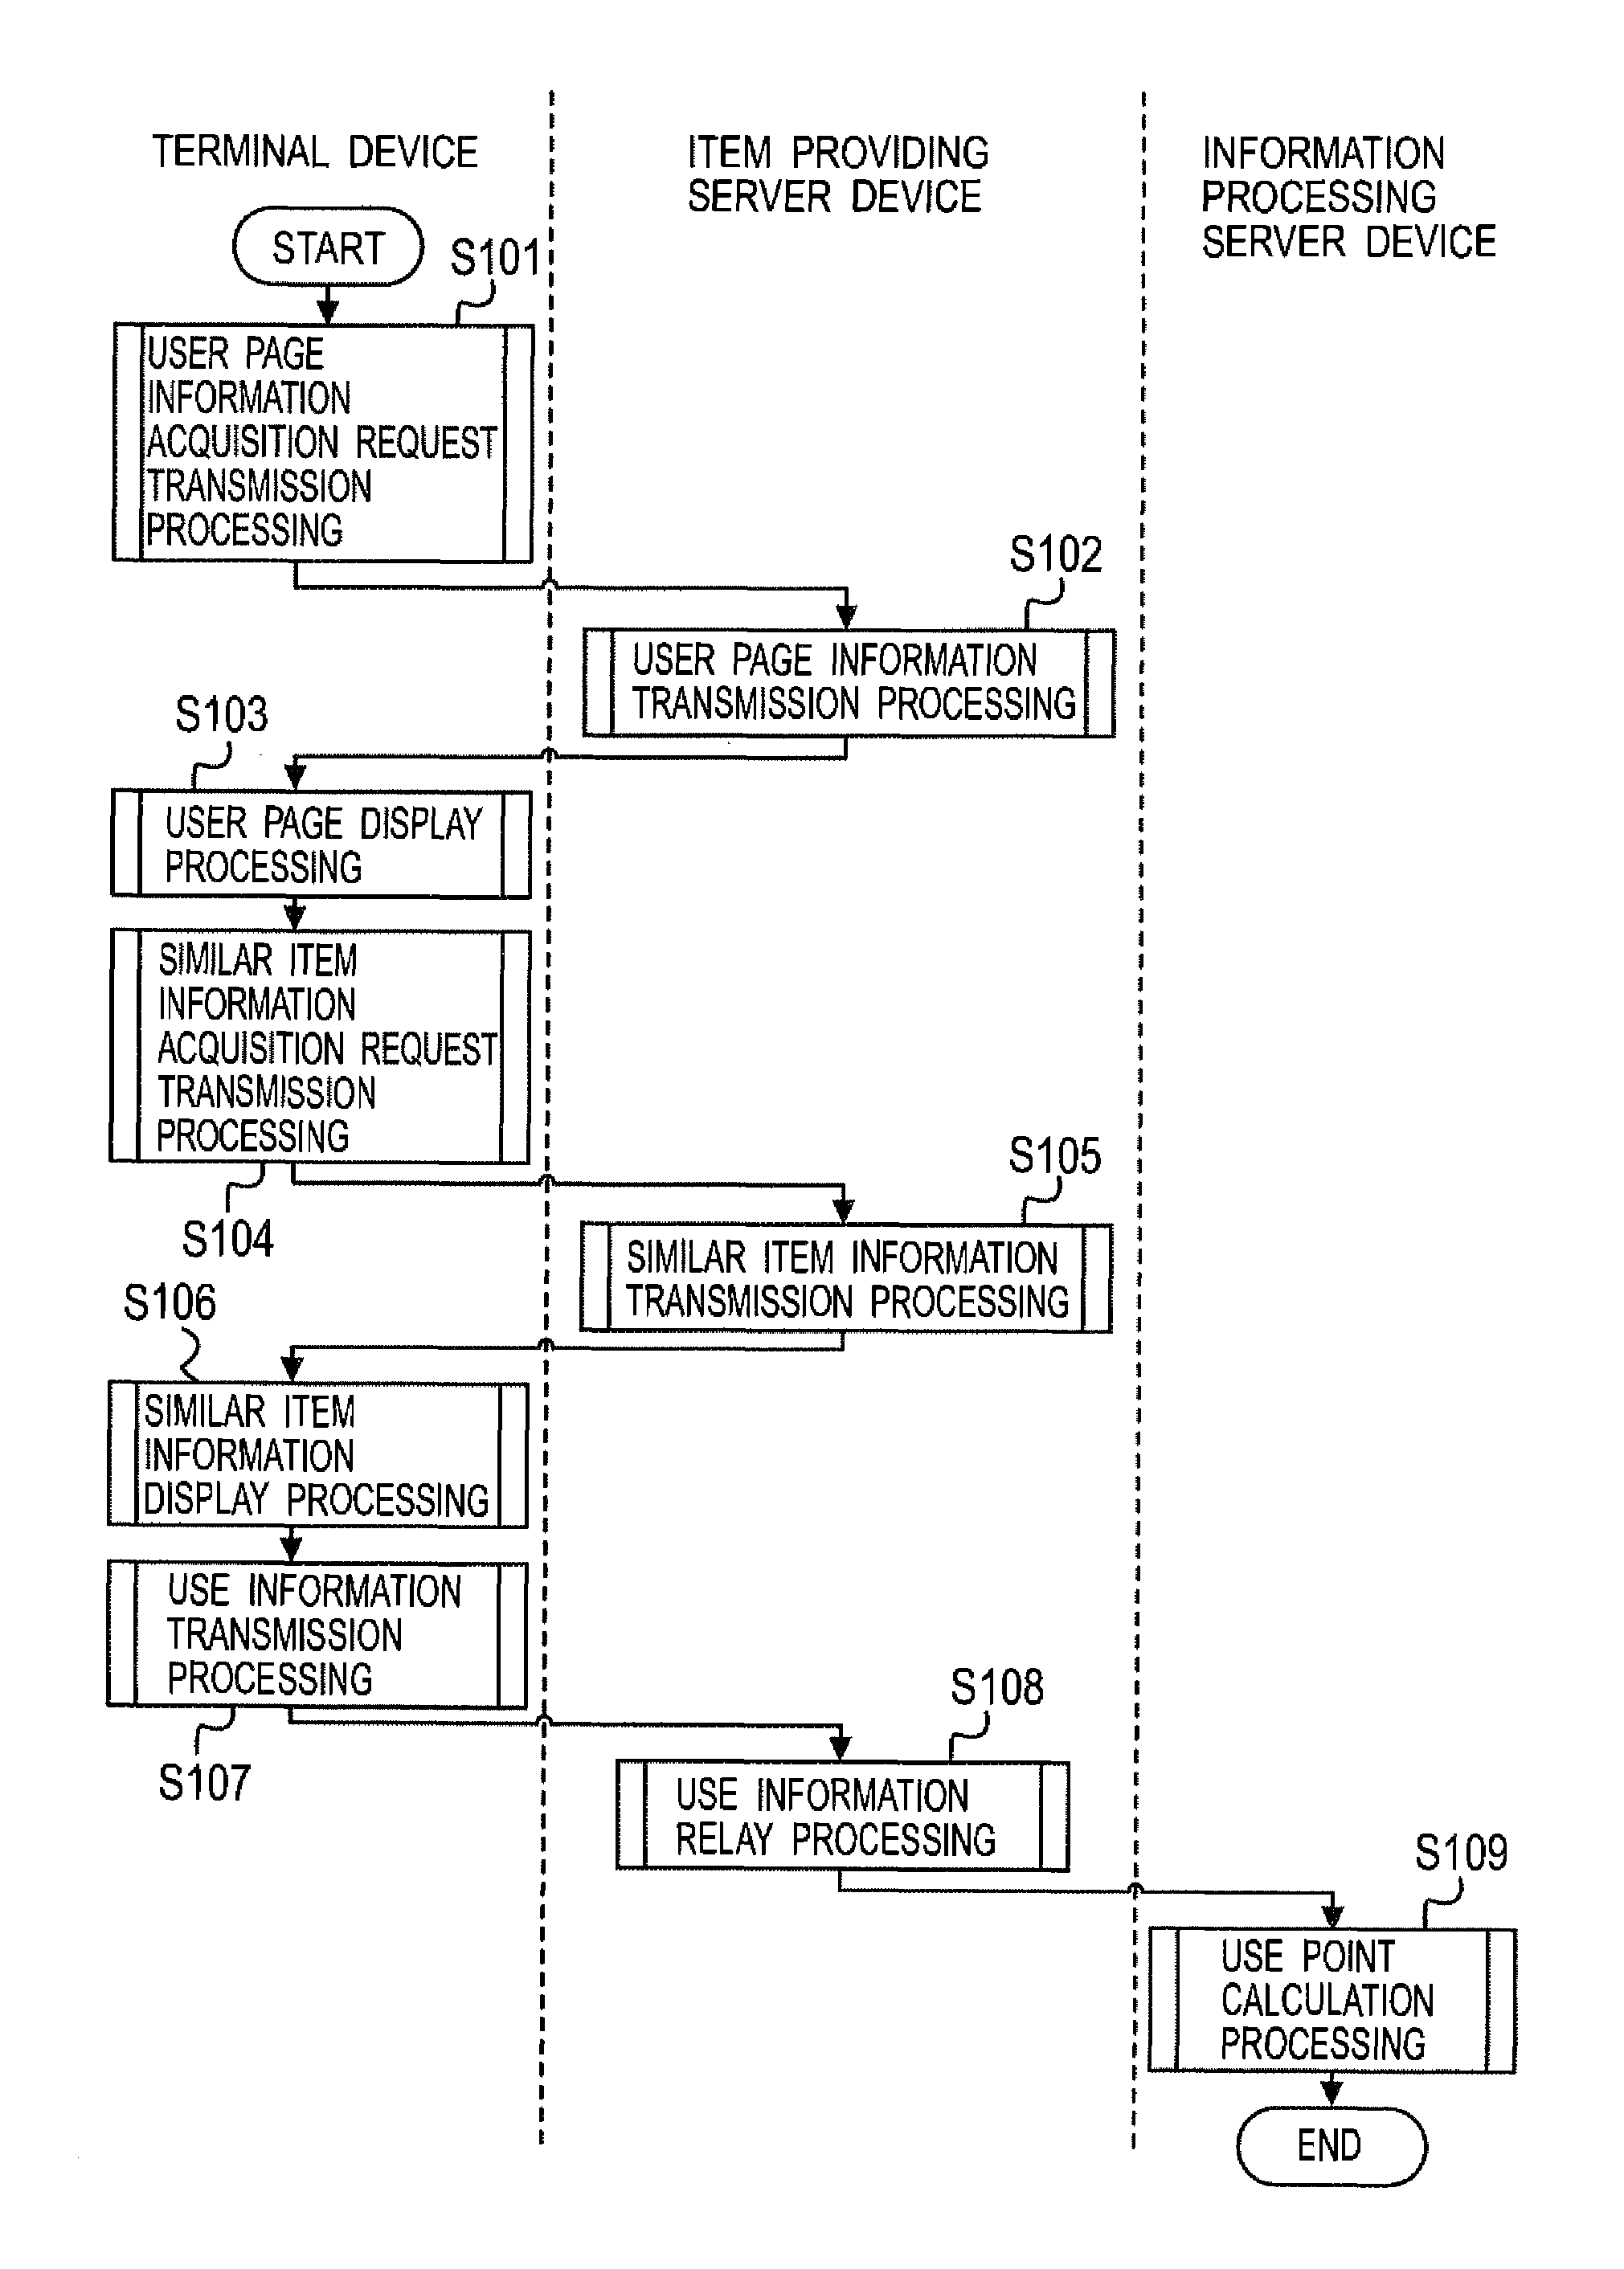 Information processing using a point system based on usage history and associated data creation